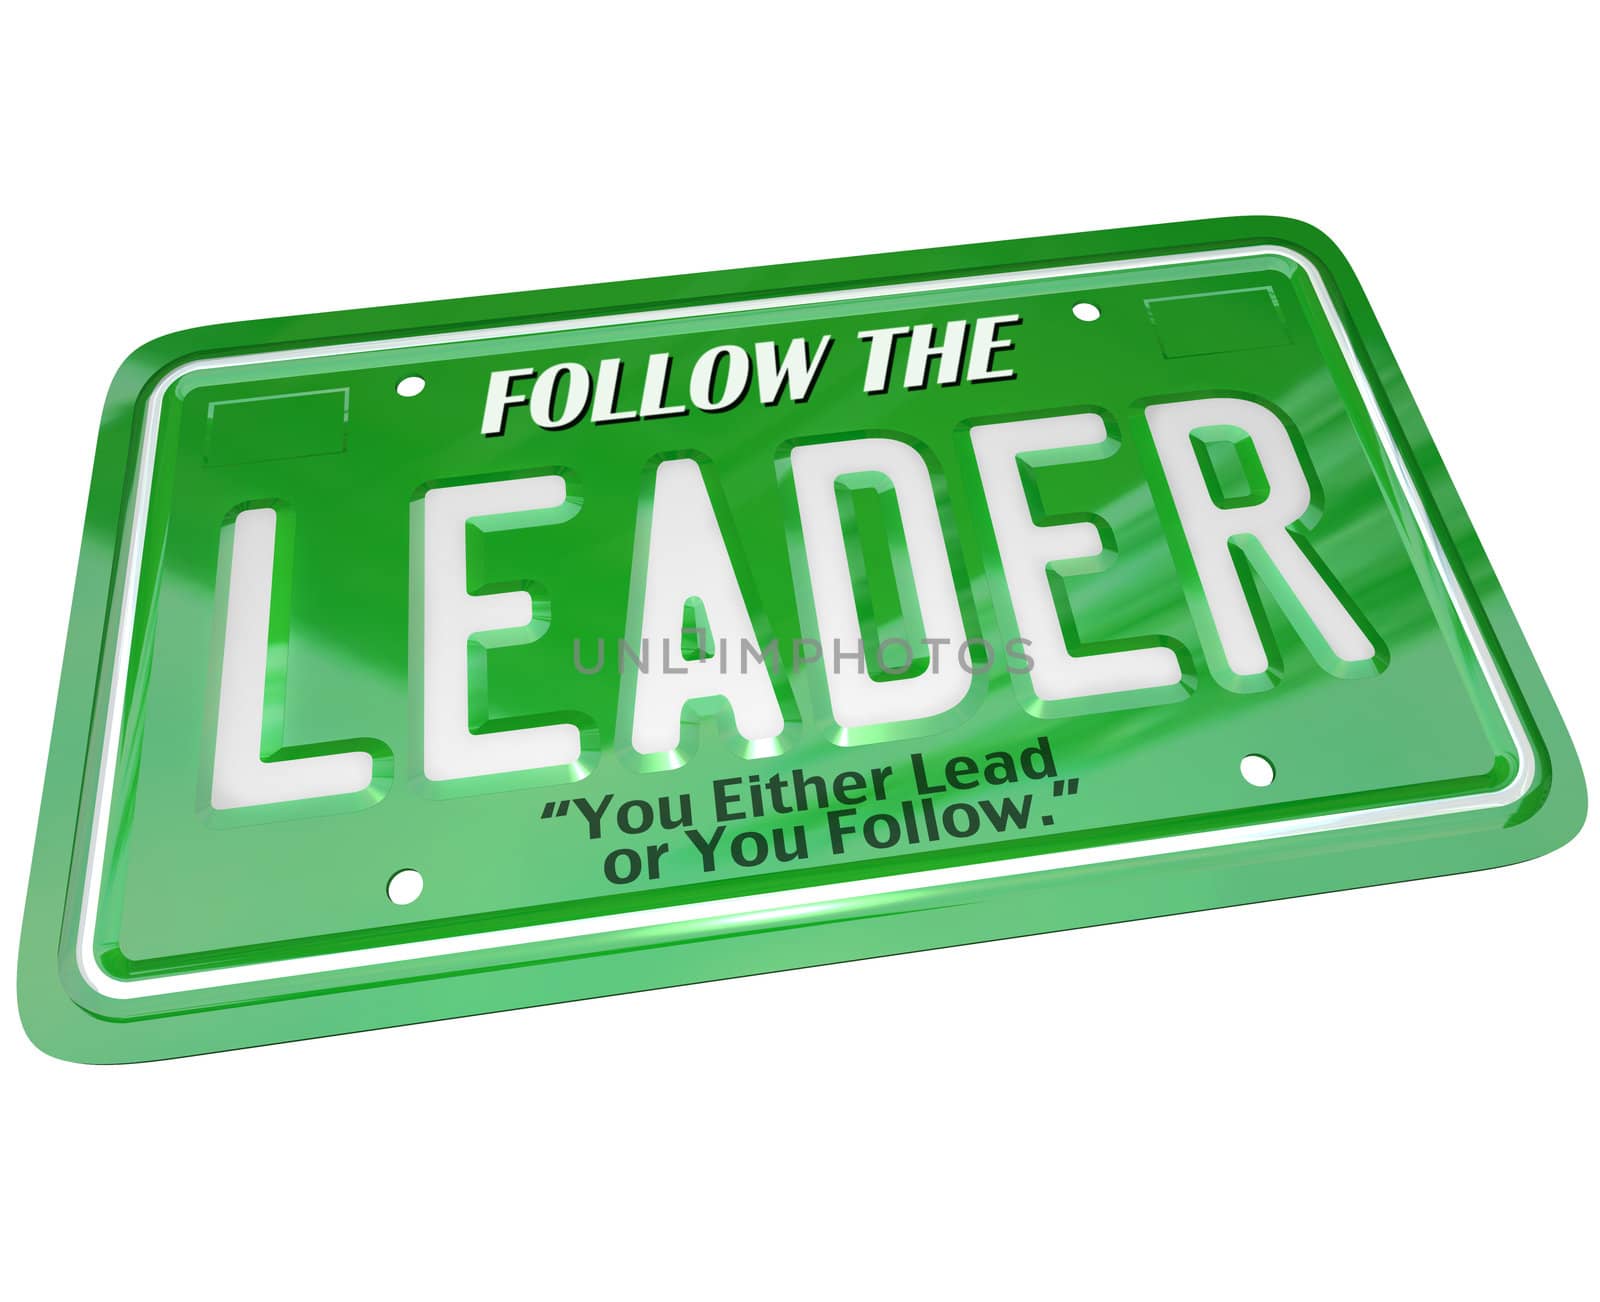 A green license plate featuring the word Leader representing a top executive or manager taking the lead in front of a group or just driving down a road or highway